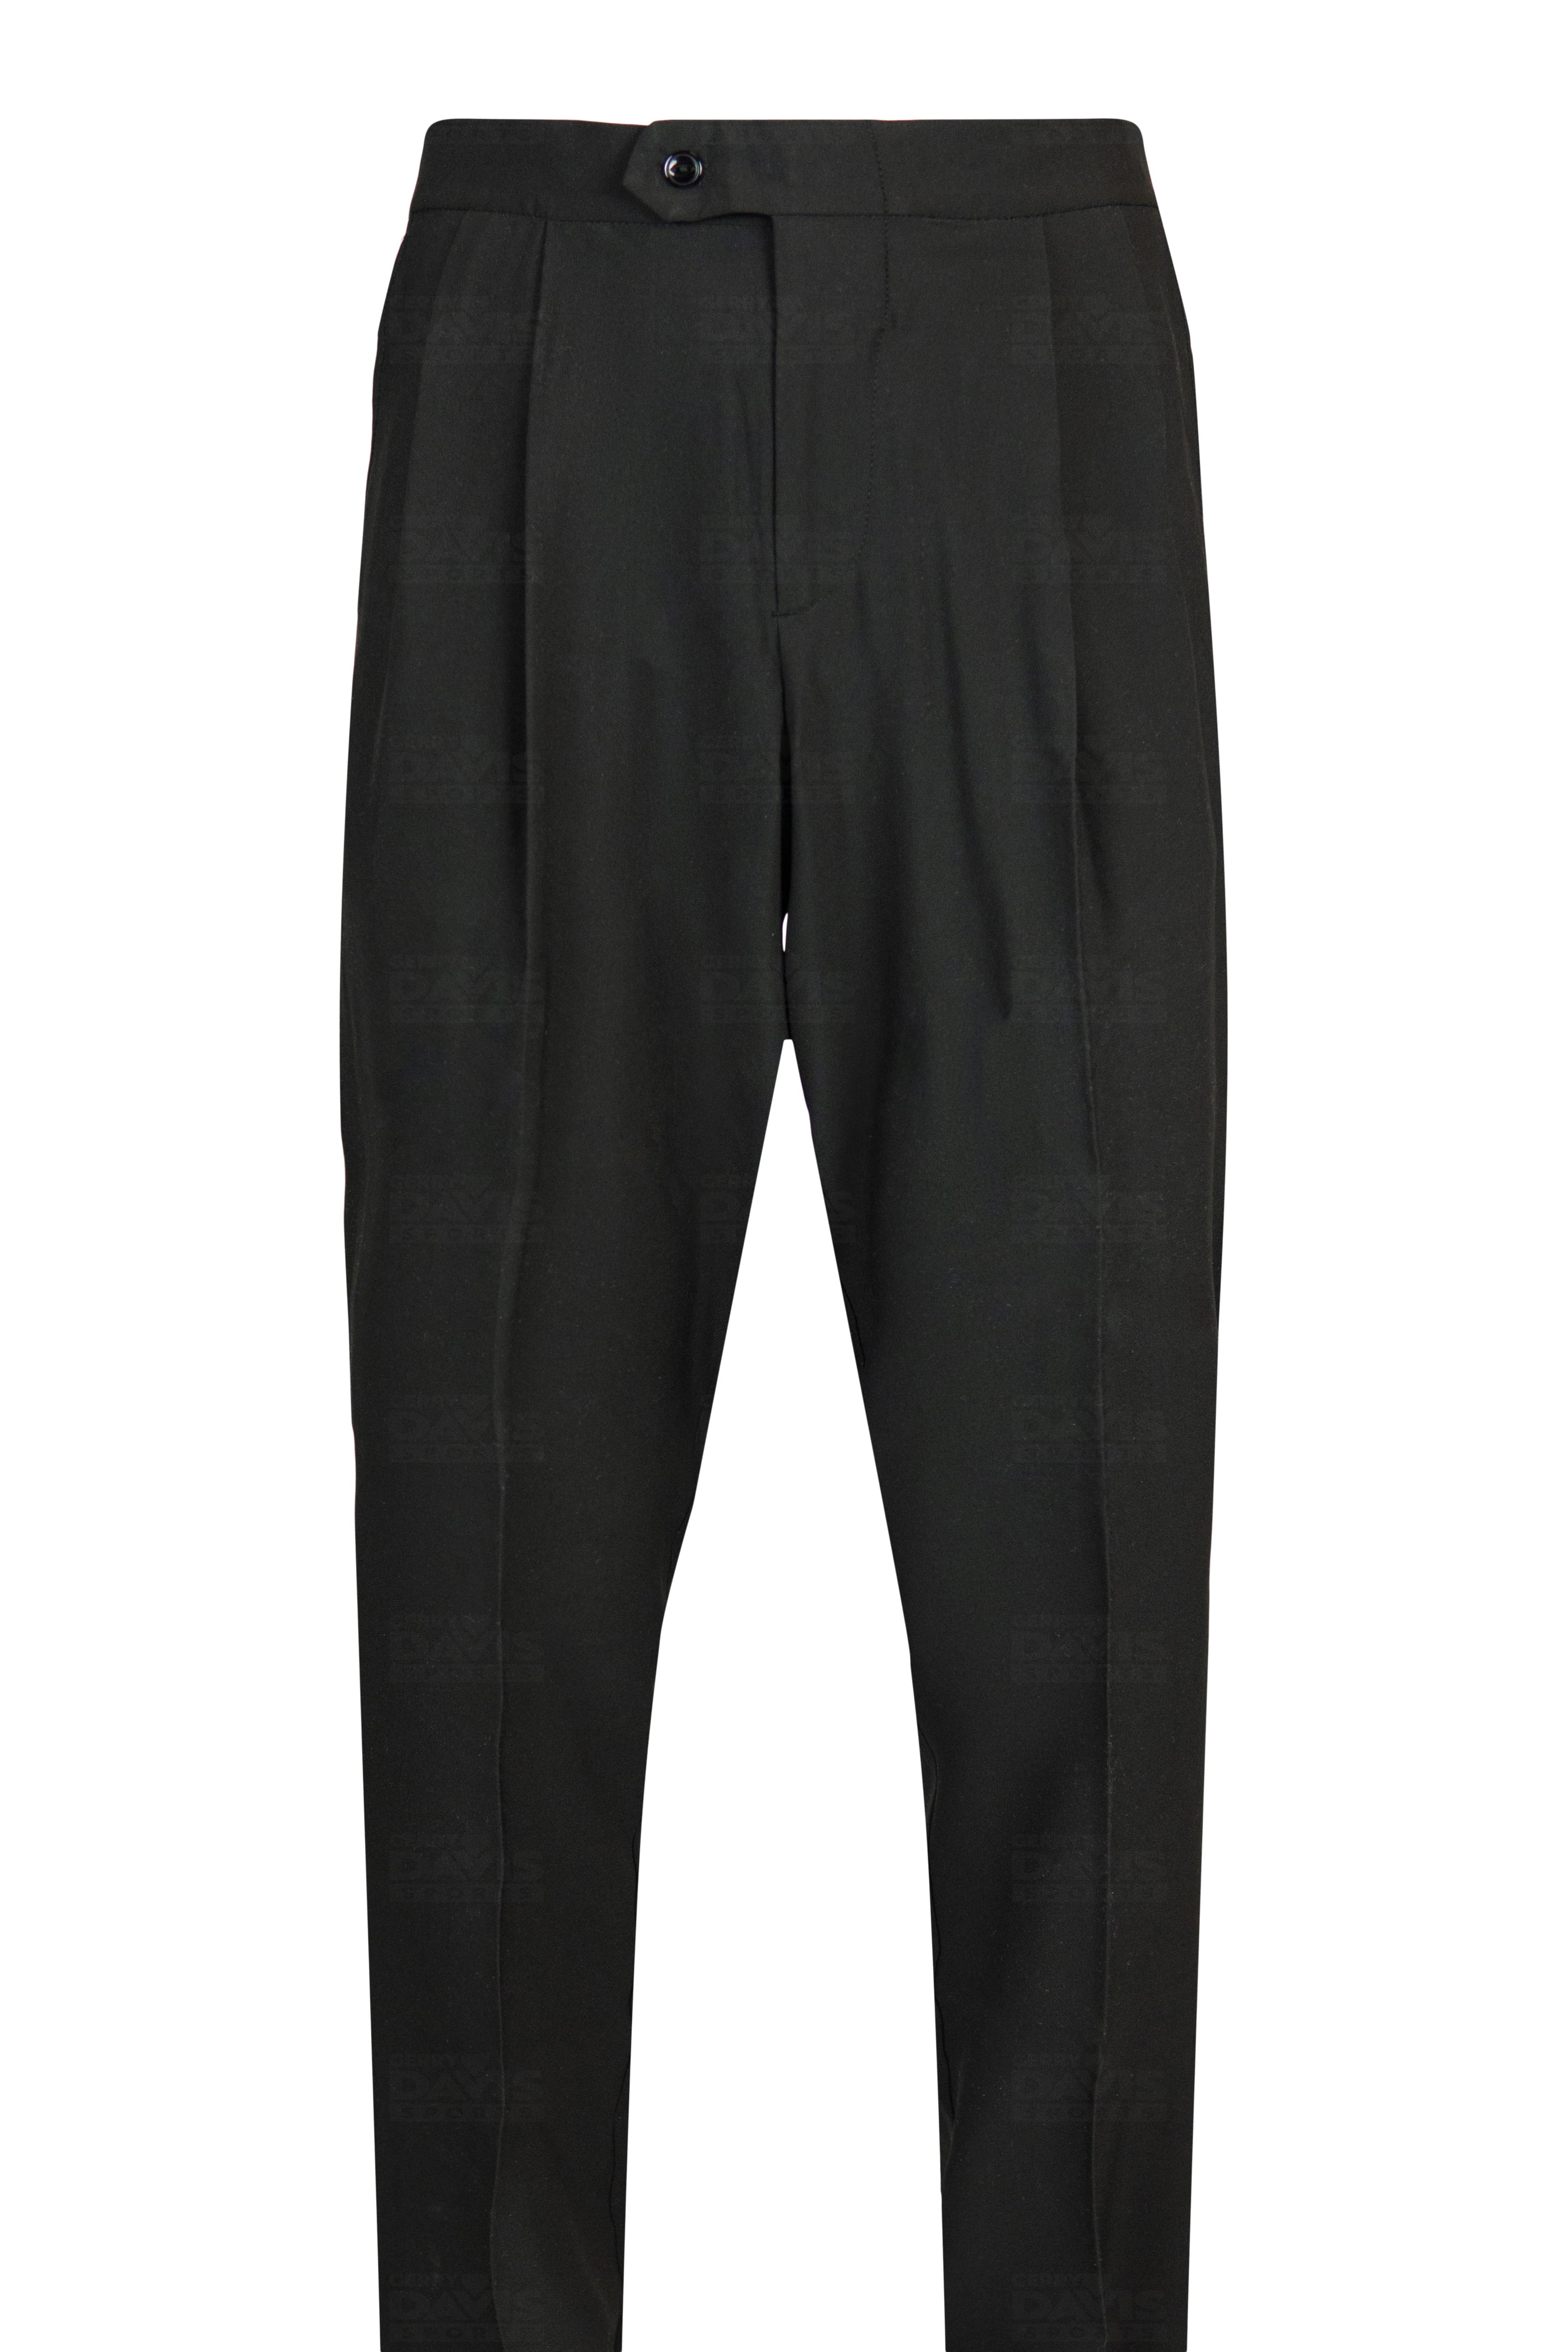 GR8 Call 4-Way Stretch Pleated Basketball Referee Pants | Gerry Davis ...